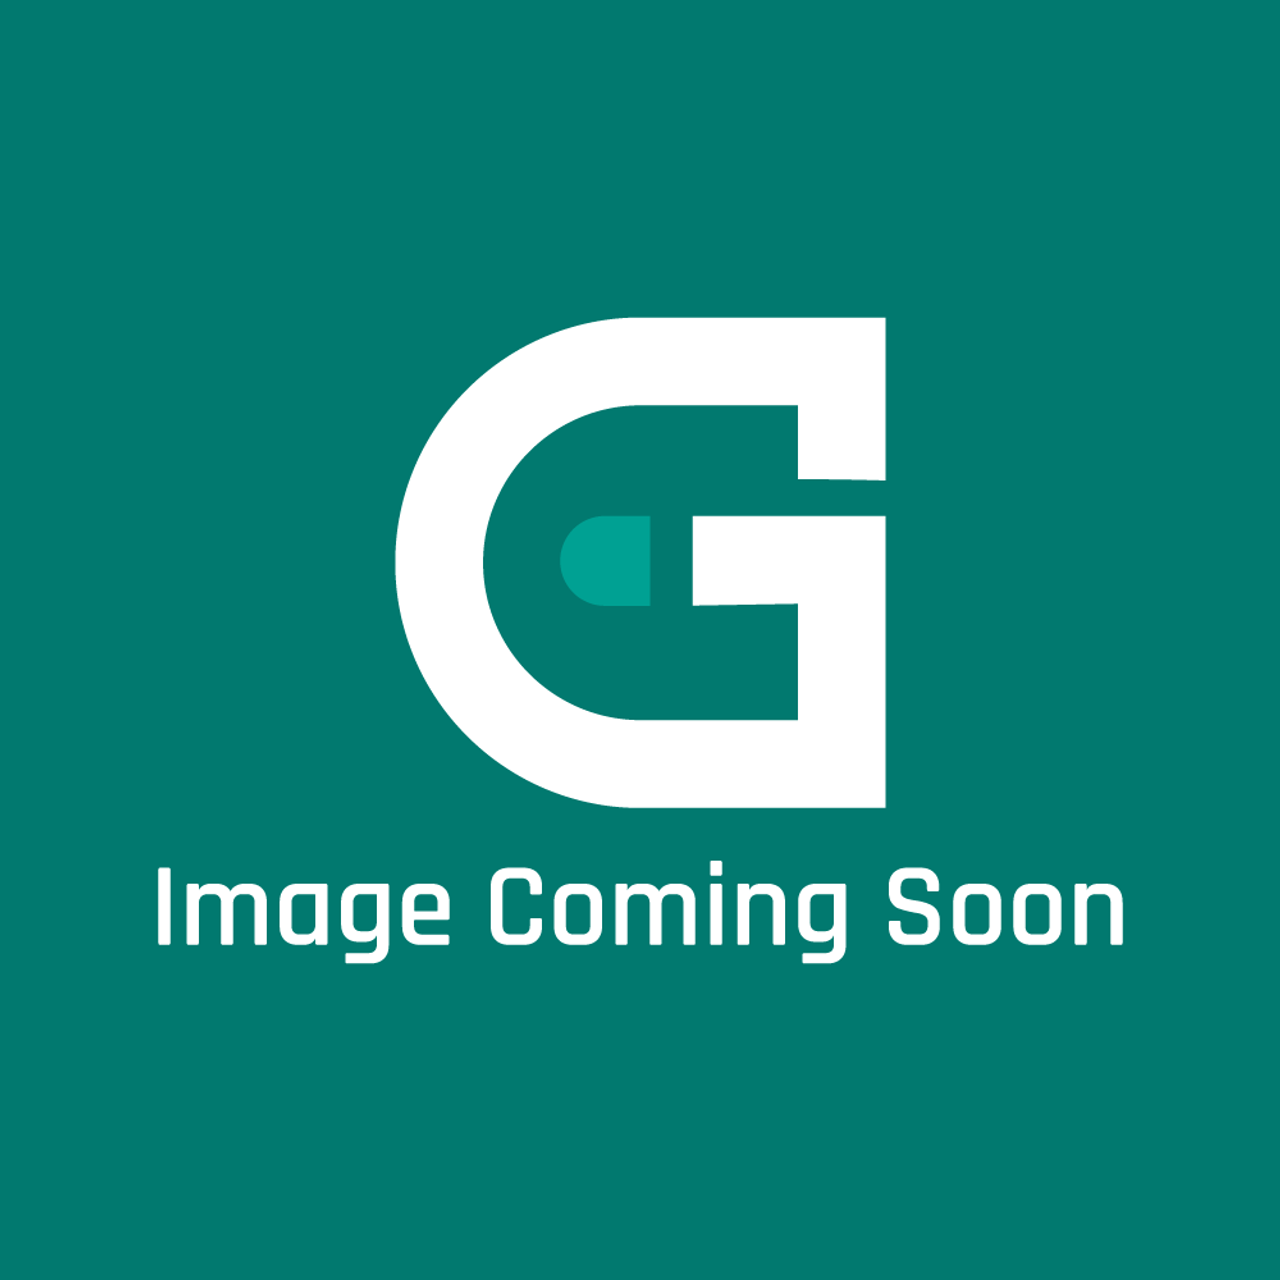 Garland 2220496 - Griddle Assy 24G-U - Image Coming Soon!